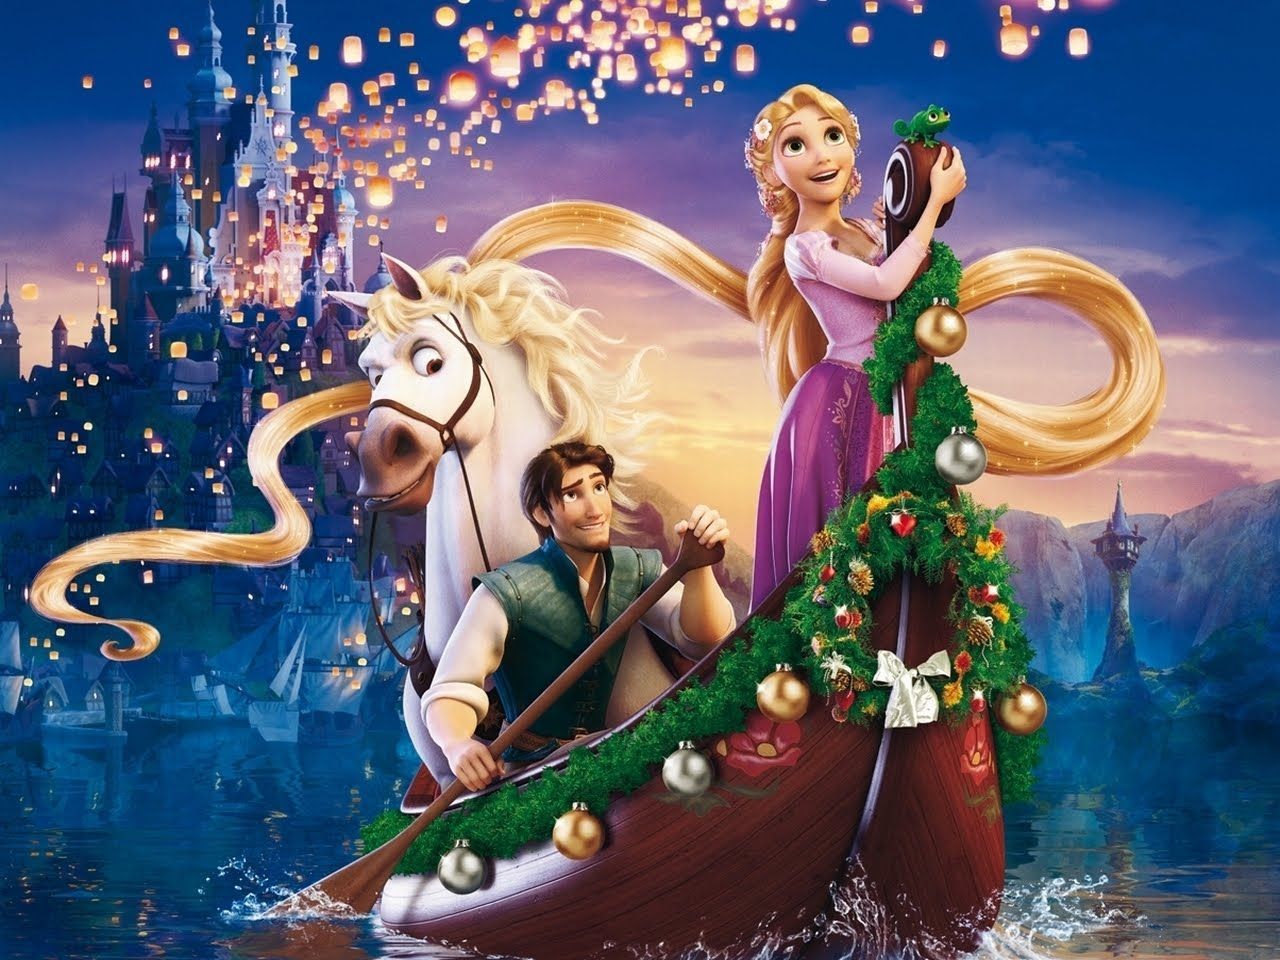 Rapunzel and her horse are on a boat with a Christmas tree. - Rapunzel